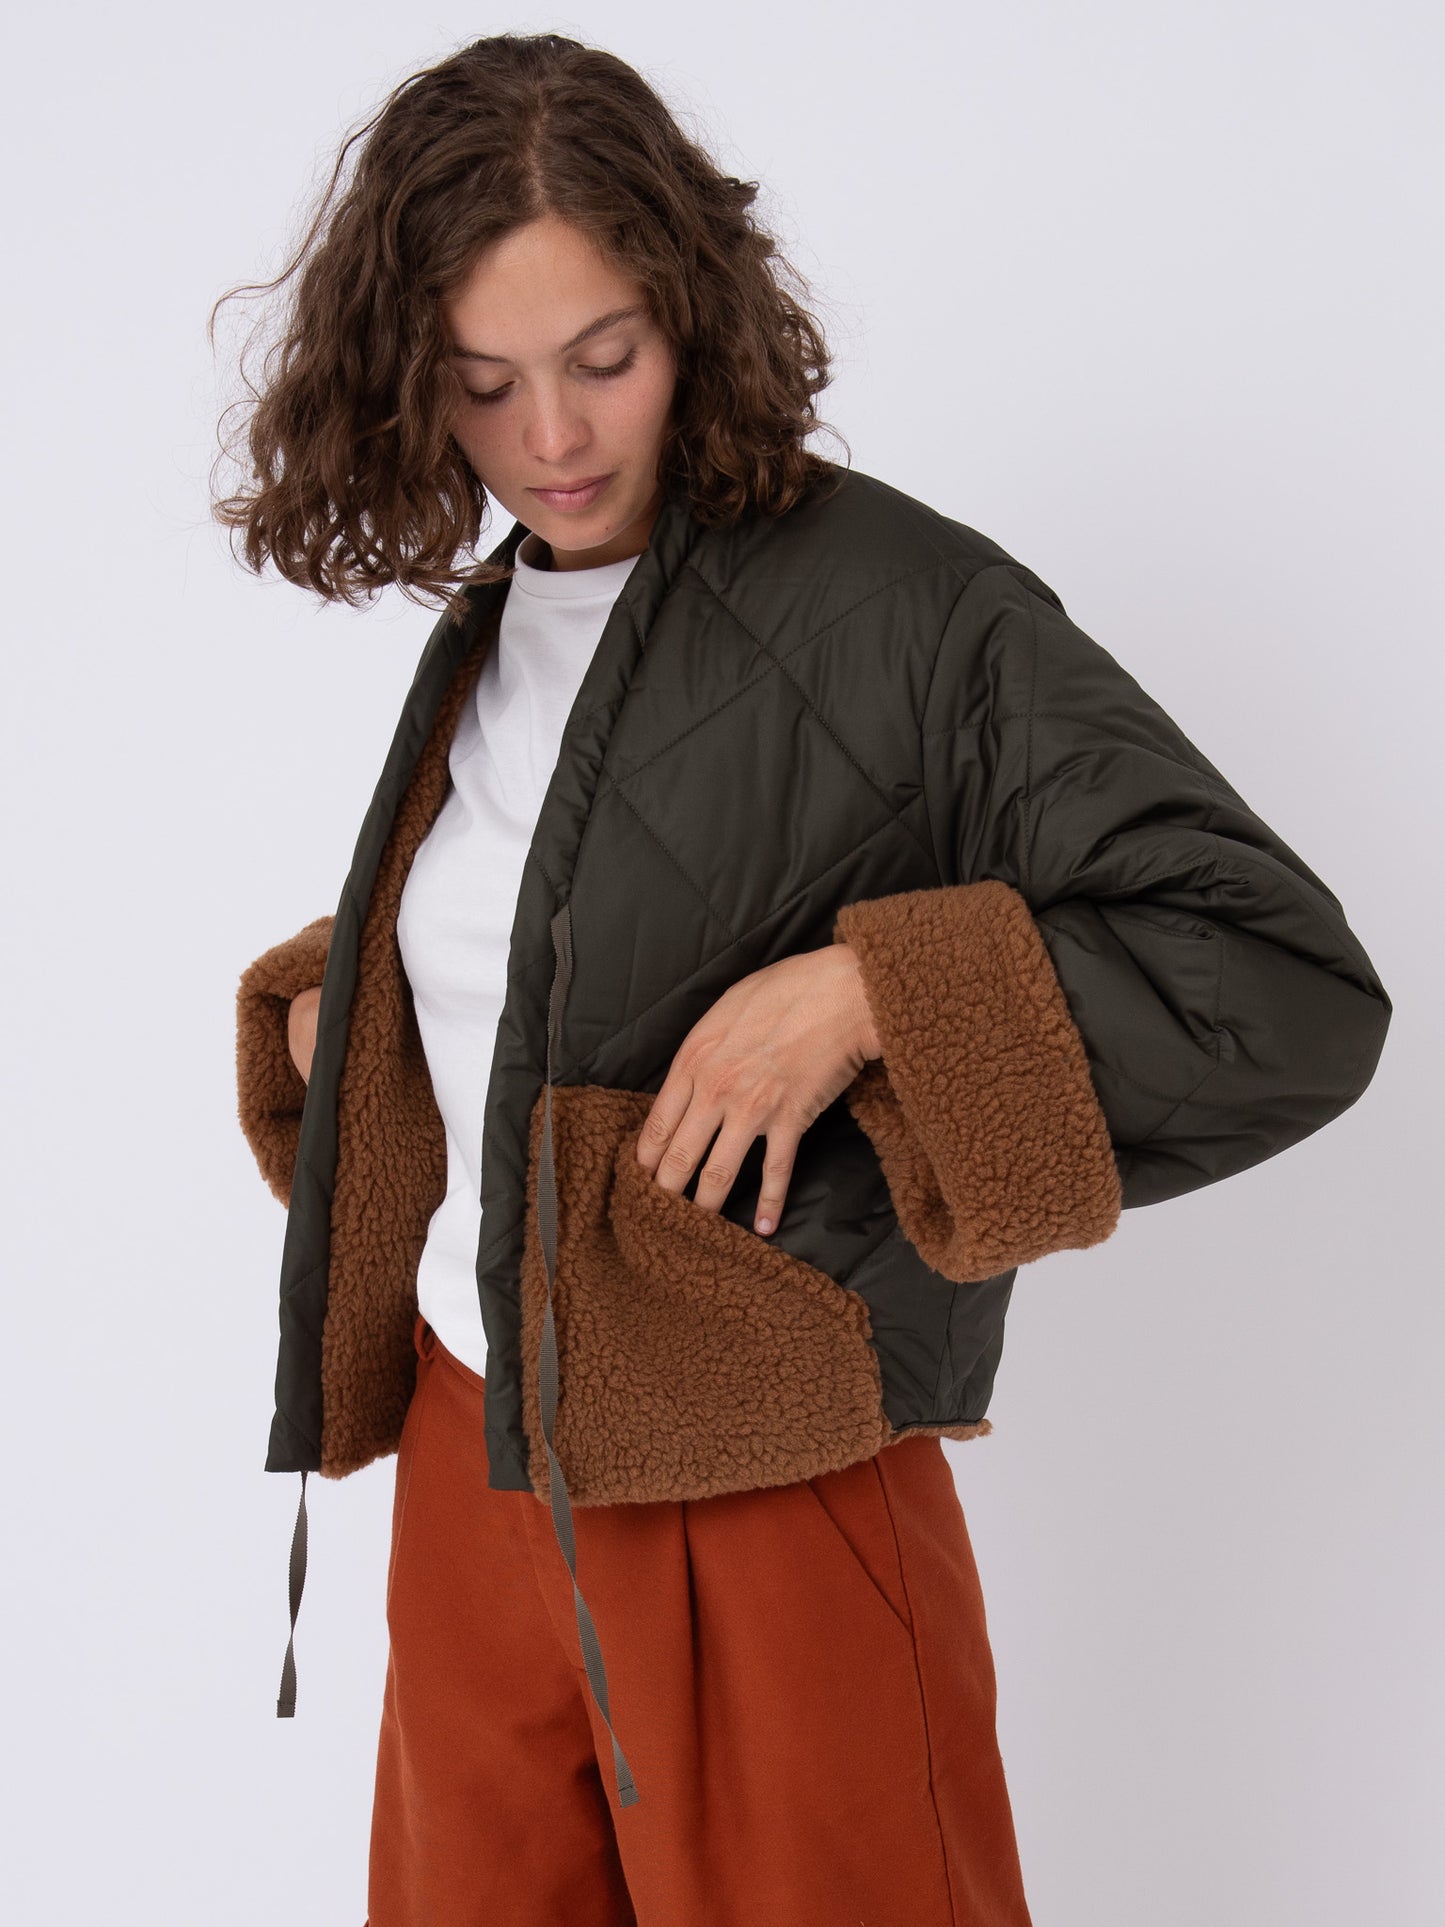 Bomber, front view, padded, double-face, unisex